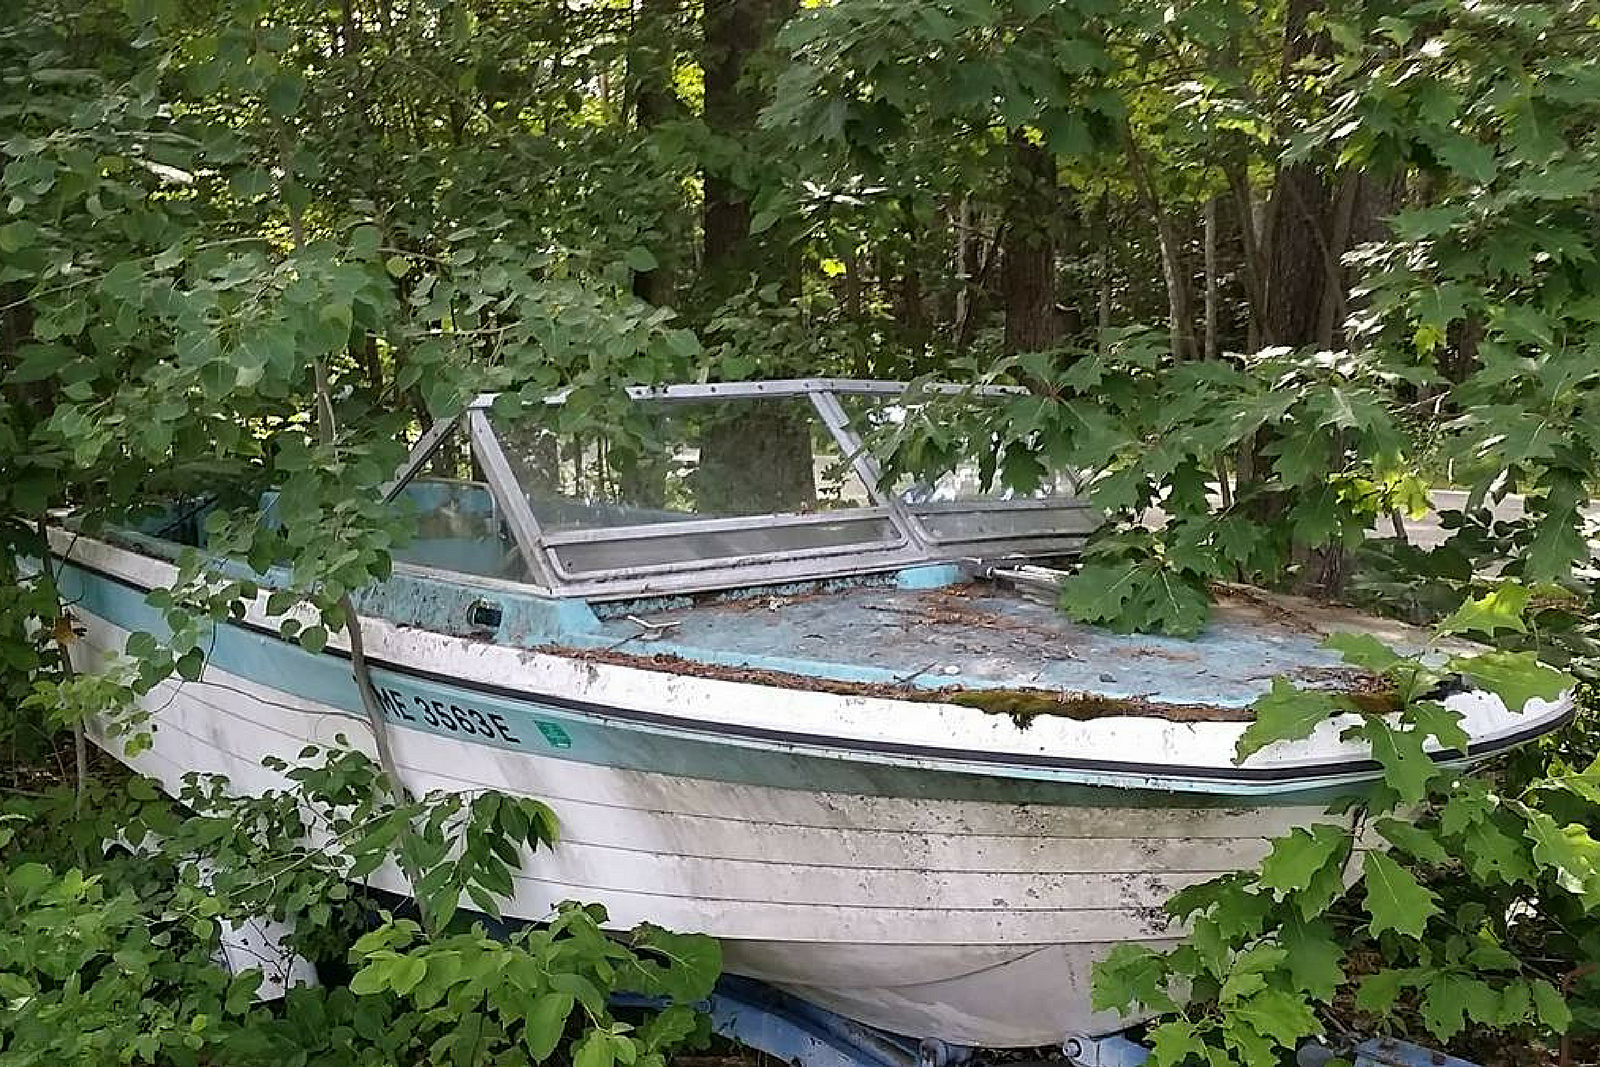 Craigslist Free Stuff Section Has All of Your Maine Summer ...